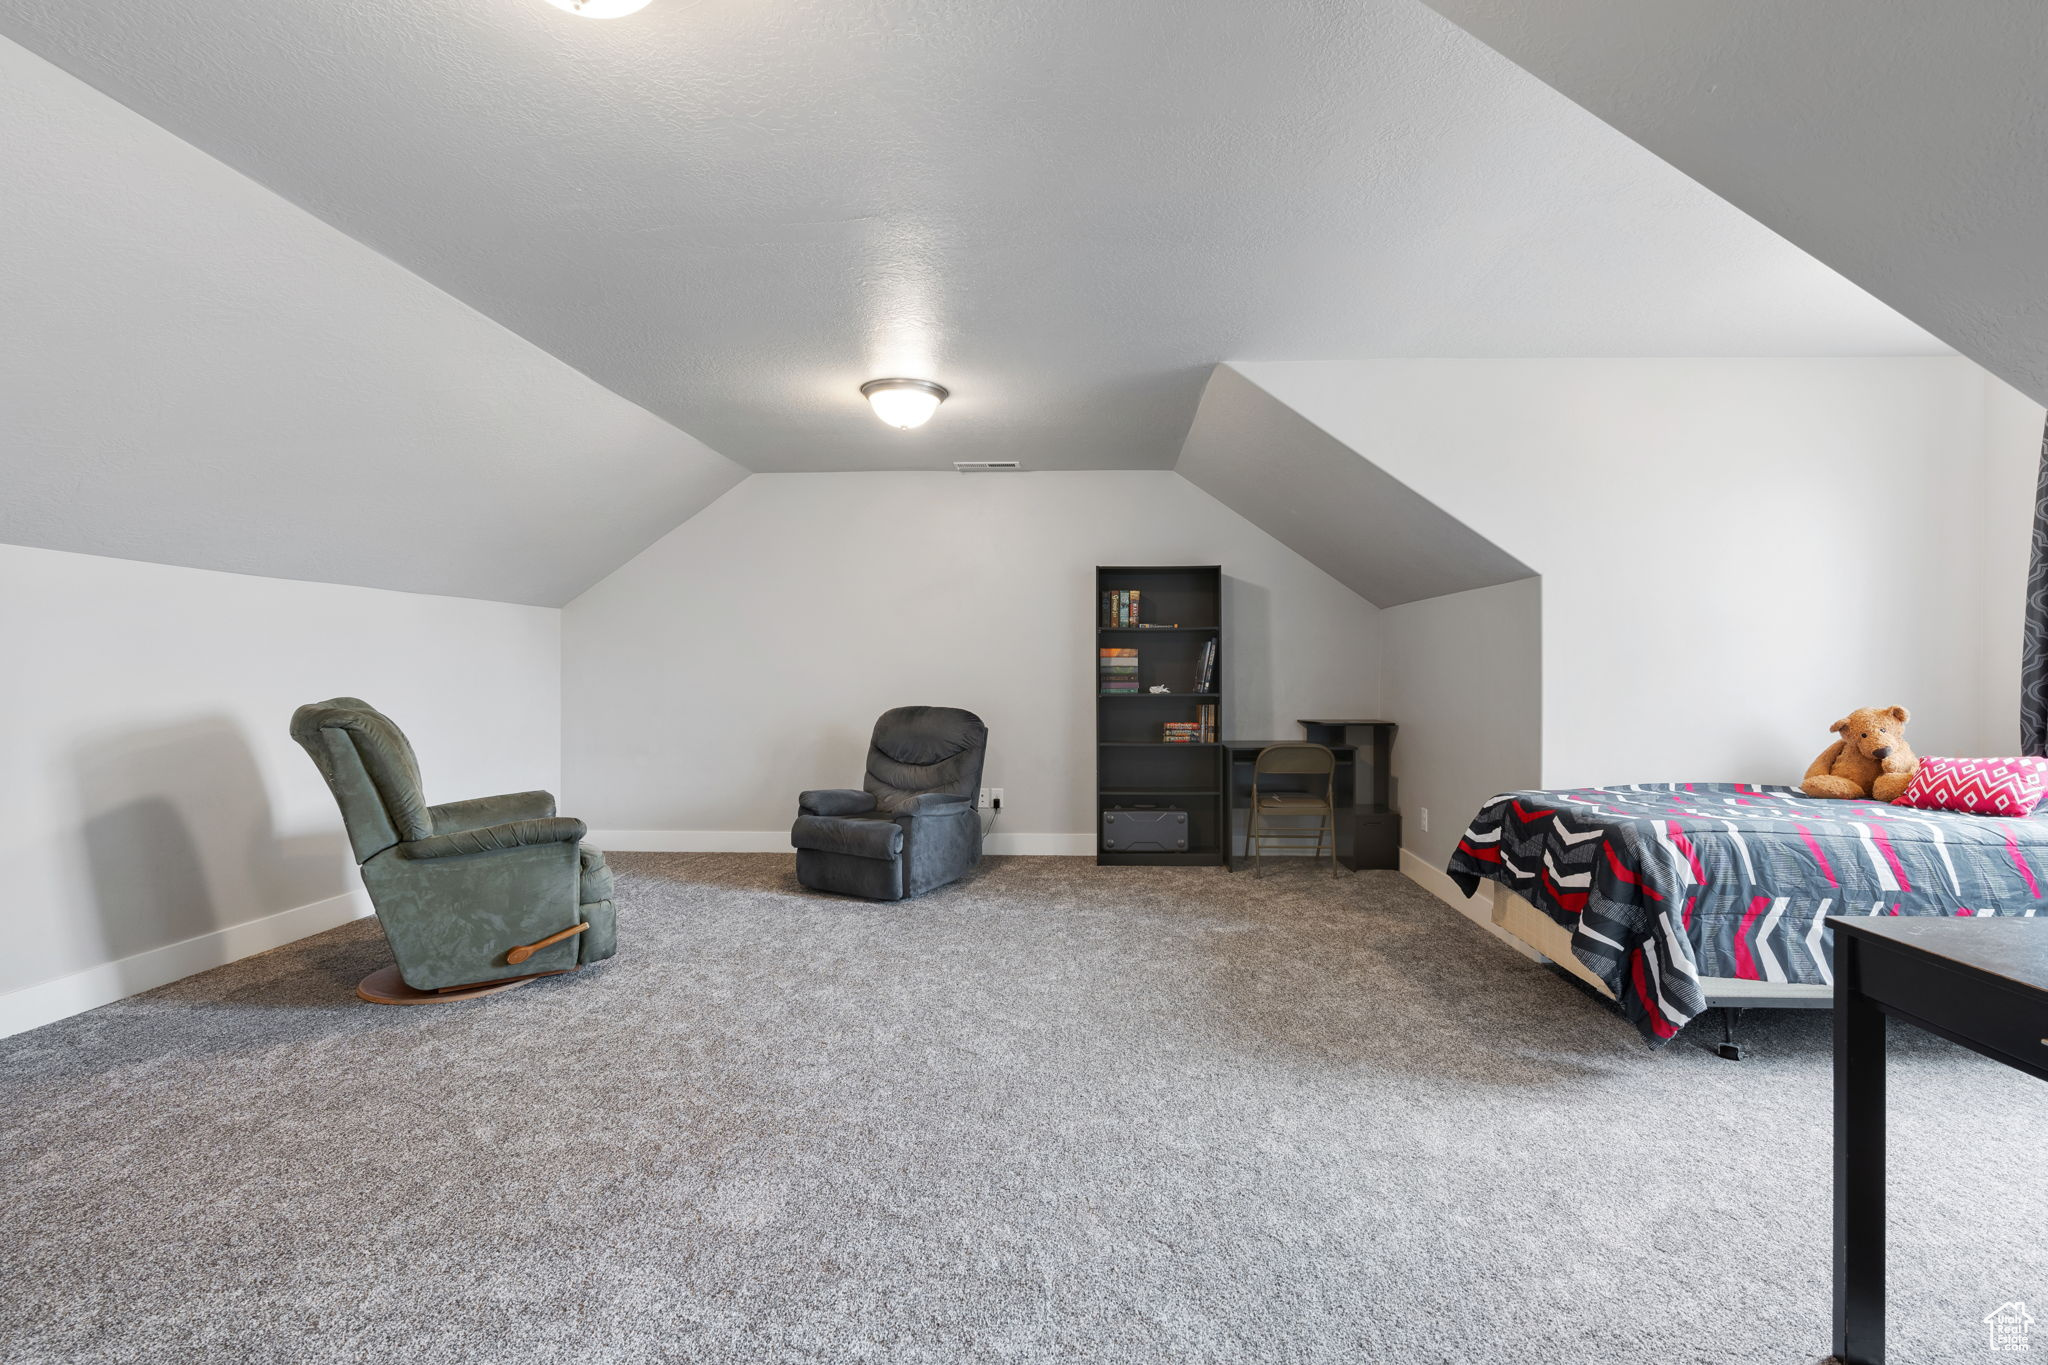 Large bedroom 4 over the garage. Seller has used it for a massive bedroom for multiple kids. Loft style game room, media room, toy room, or family room.